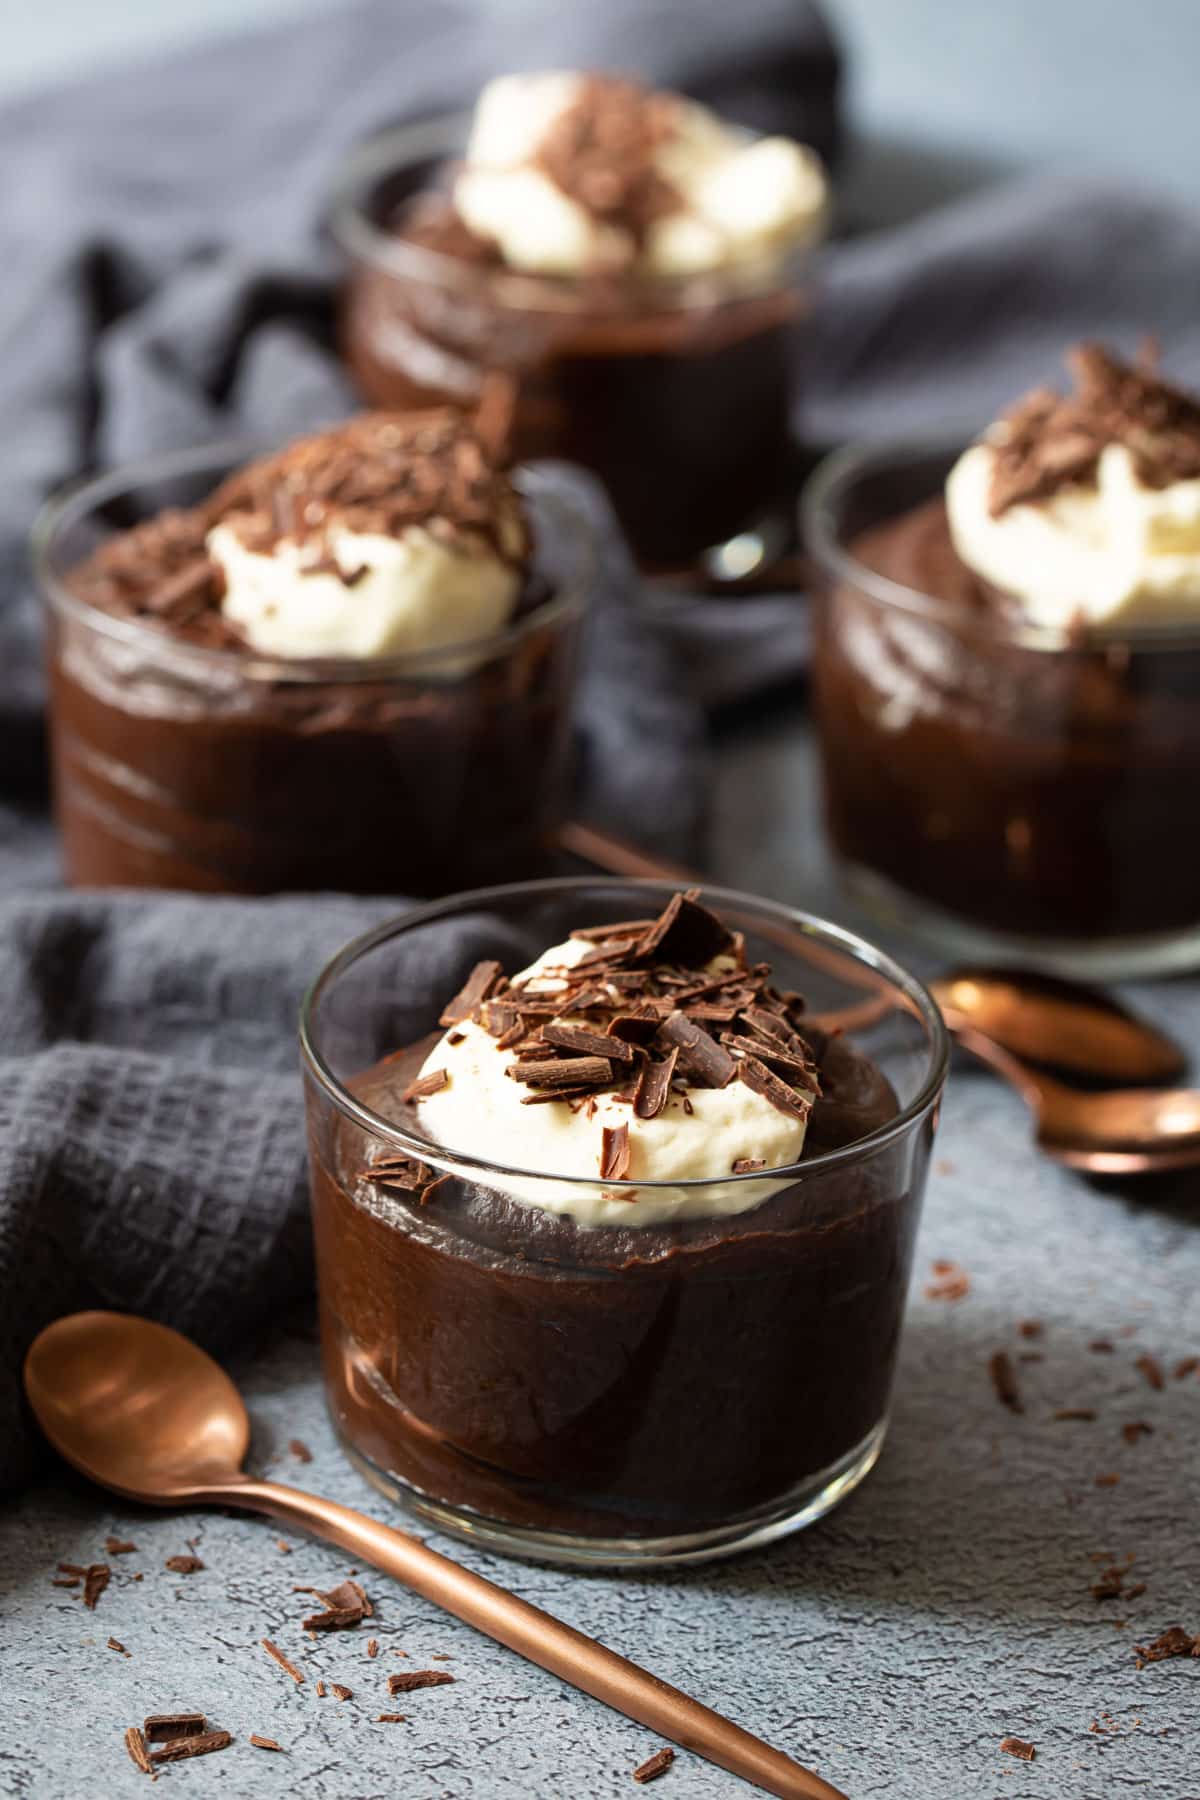 chocolate mousse in individual serves, topped with cream and chocolate.